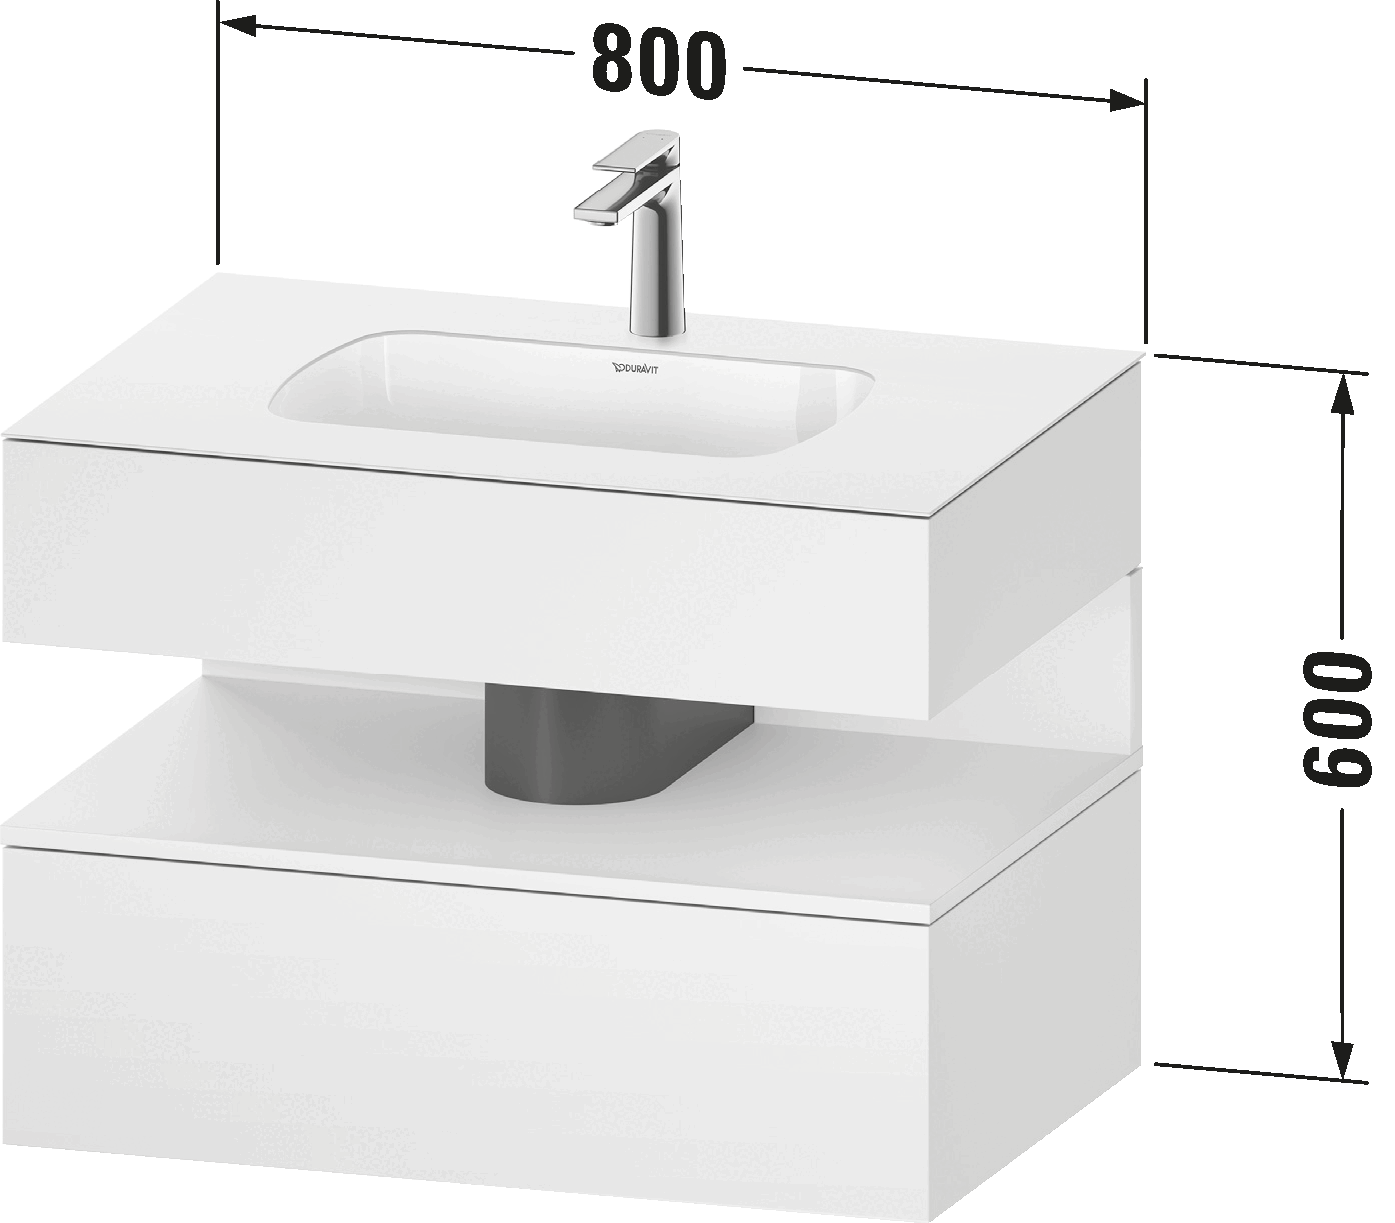 Built-in basin with console vanity unit, QA4785